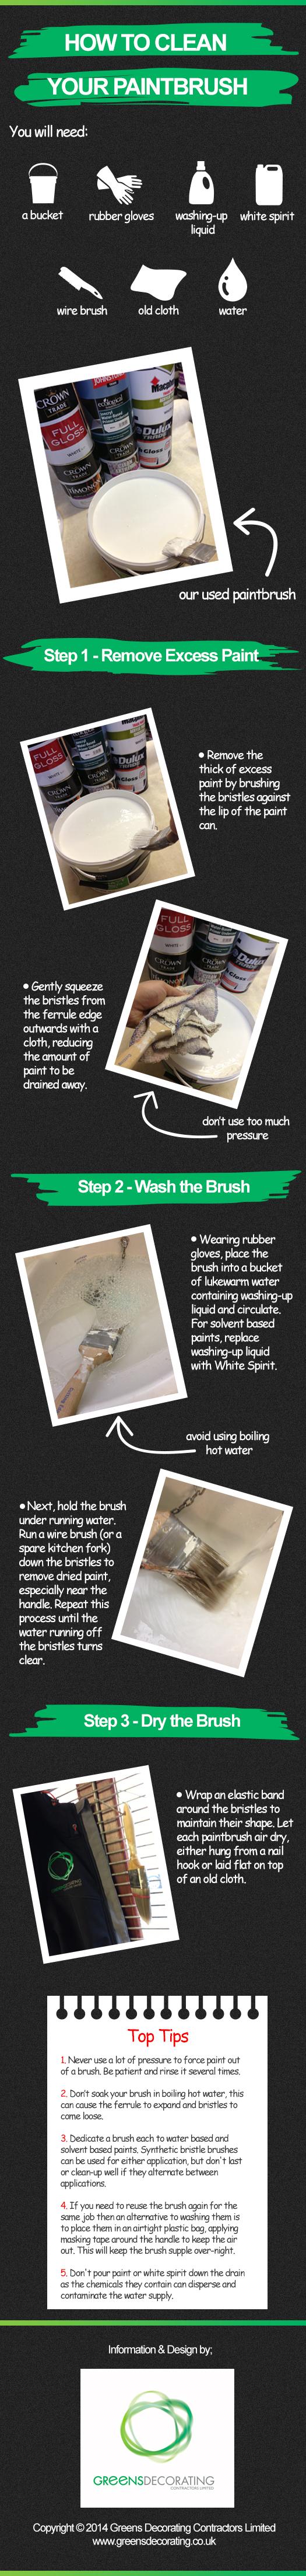 How to clean paint brushes; tips from decorating professionals